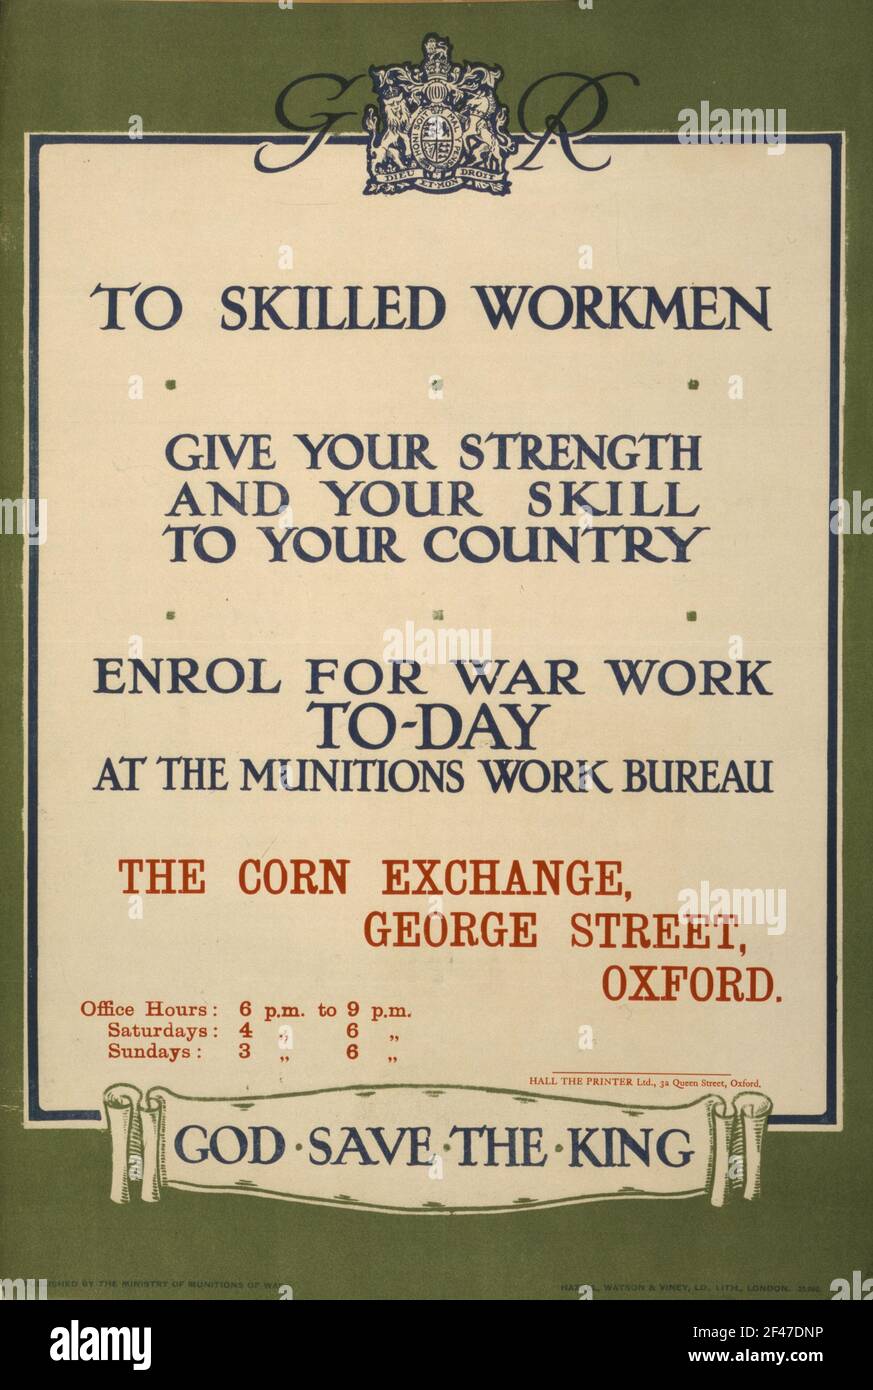 A first world war recruitment poster calling for skilled workmen to work in munitions Stock Photo